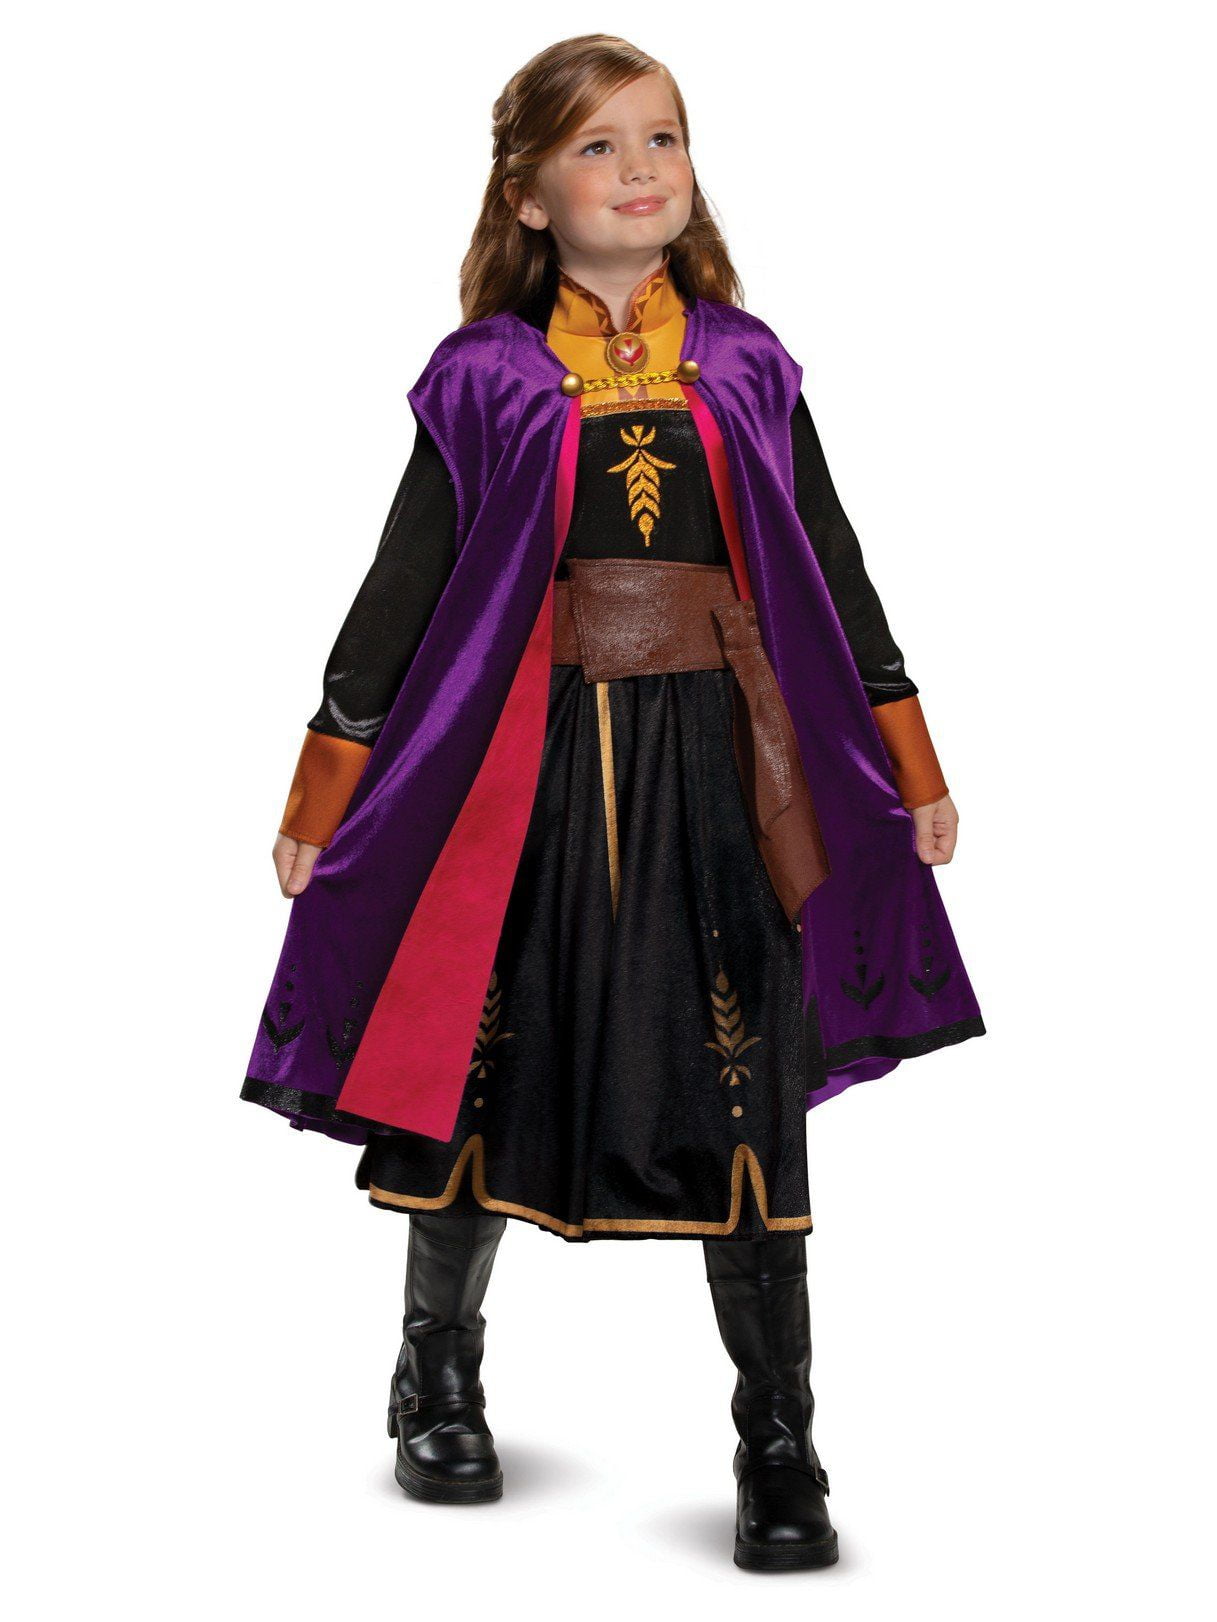 Kids Halloween Toddler Licensed Costume Boys Girls Cosplay Fancy Dress Outfit 